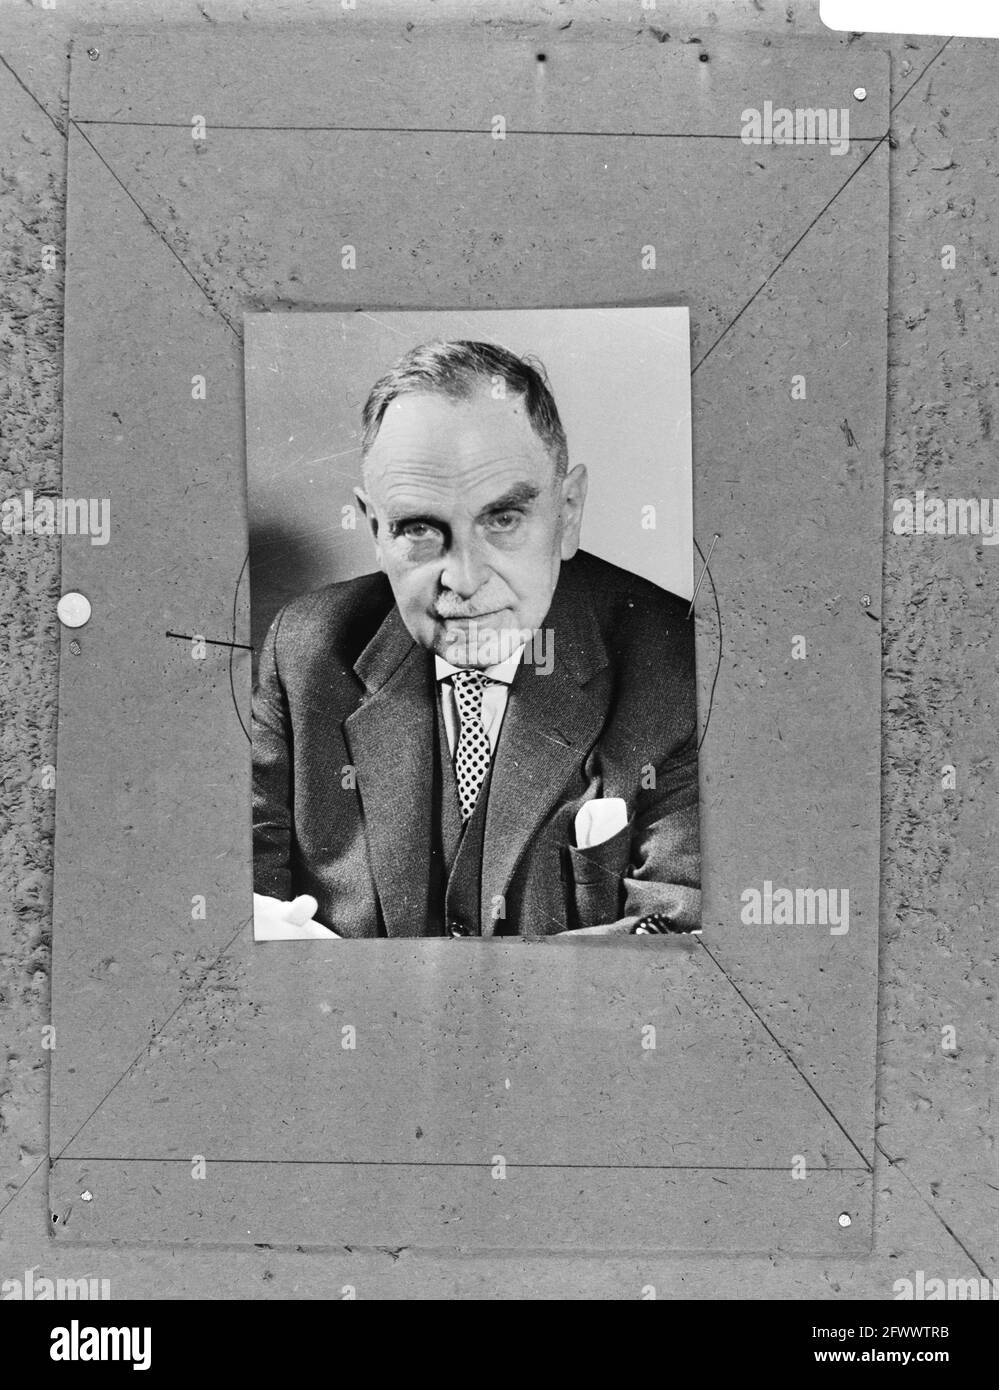 Prof. Otto Hahn (1879-1968), discoverer of atomic fission. Nobel Prize winner in chemistry 1944, April 16, 1970, Nobel Prize in chemistry, nuclear physicists, portraits, The Netherlands, 20th century press agency photo, news to remember, documentary, historic photography 1945-1990, visual stories, human history of the Twentieth Century, capturing moments in time Stock Photo